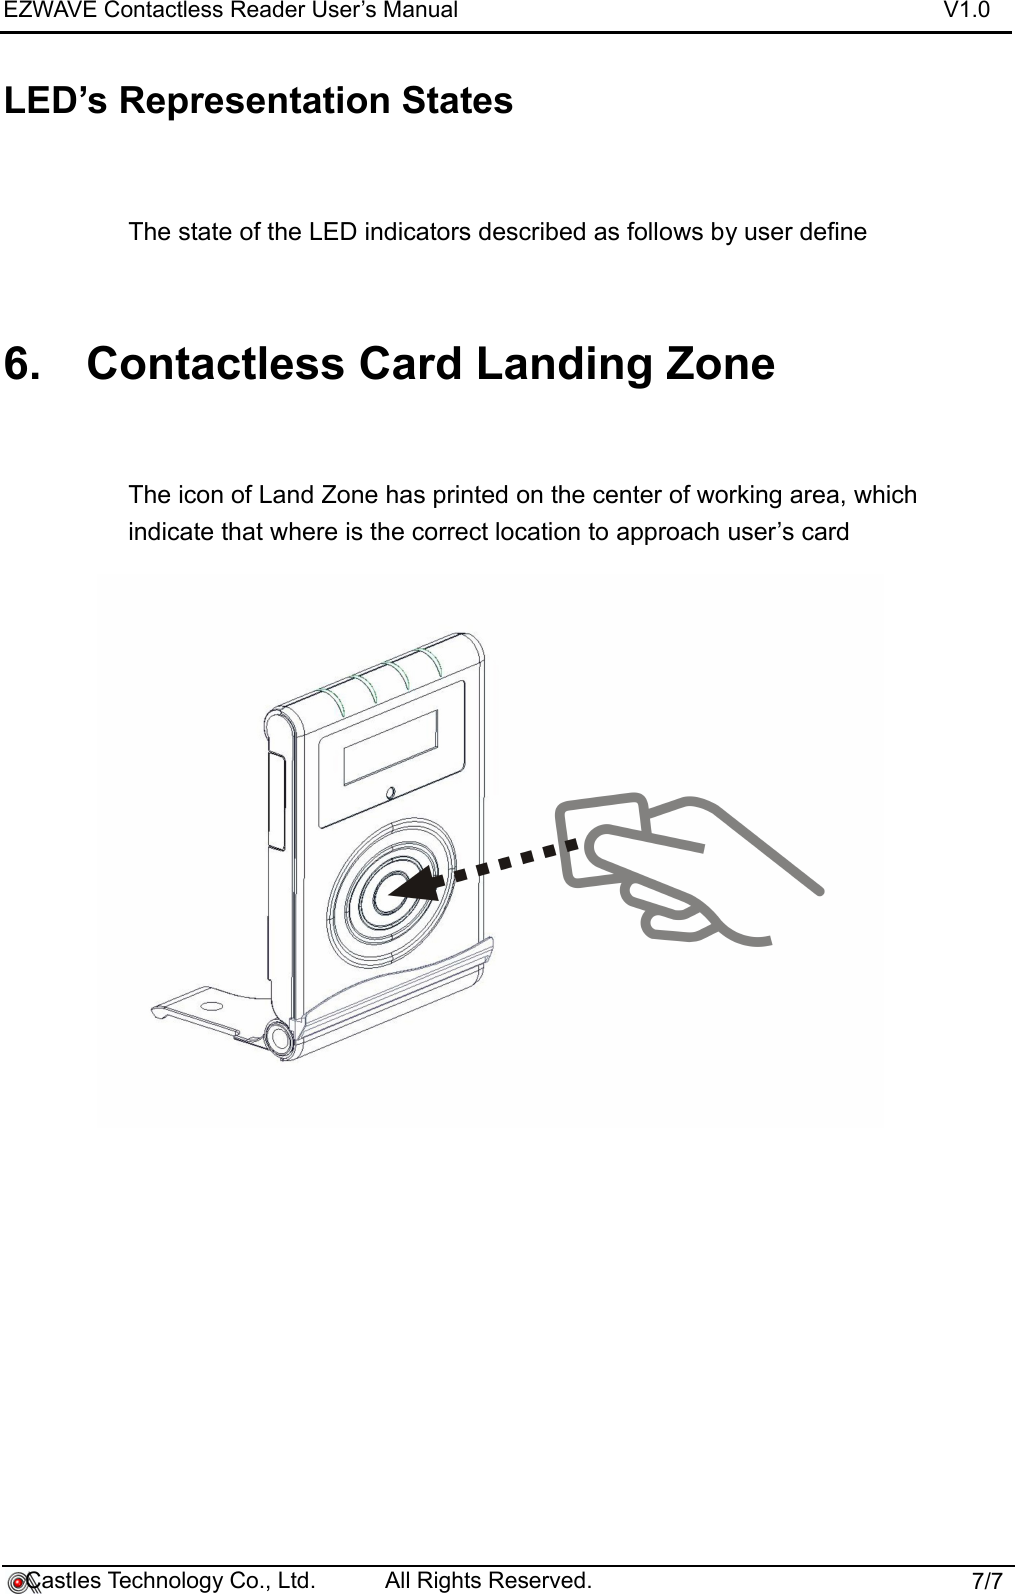 EZWAVE Contactless Reader User’s Manual V1.0LED’s Representation StatesThe state of the LED indicators described as follows by user define6. Contactless Card Landing ZoneThe icon of Land Zone has printed on the center of working area, which indicate that where is the correct location to approach user’s card    Castles Technology Co., Ltd.           All Rights Reserved.                          7/7